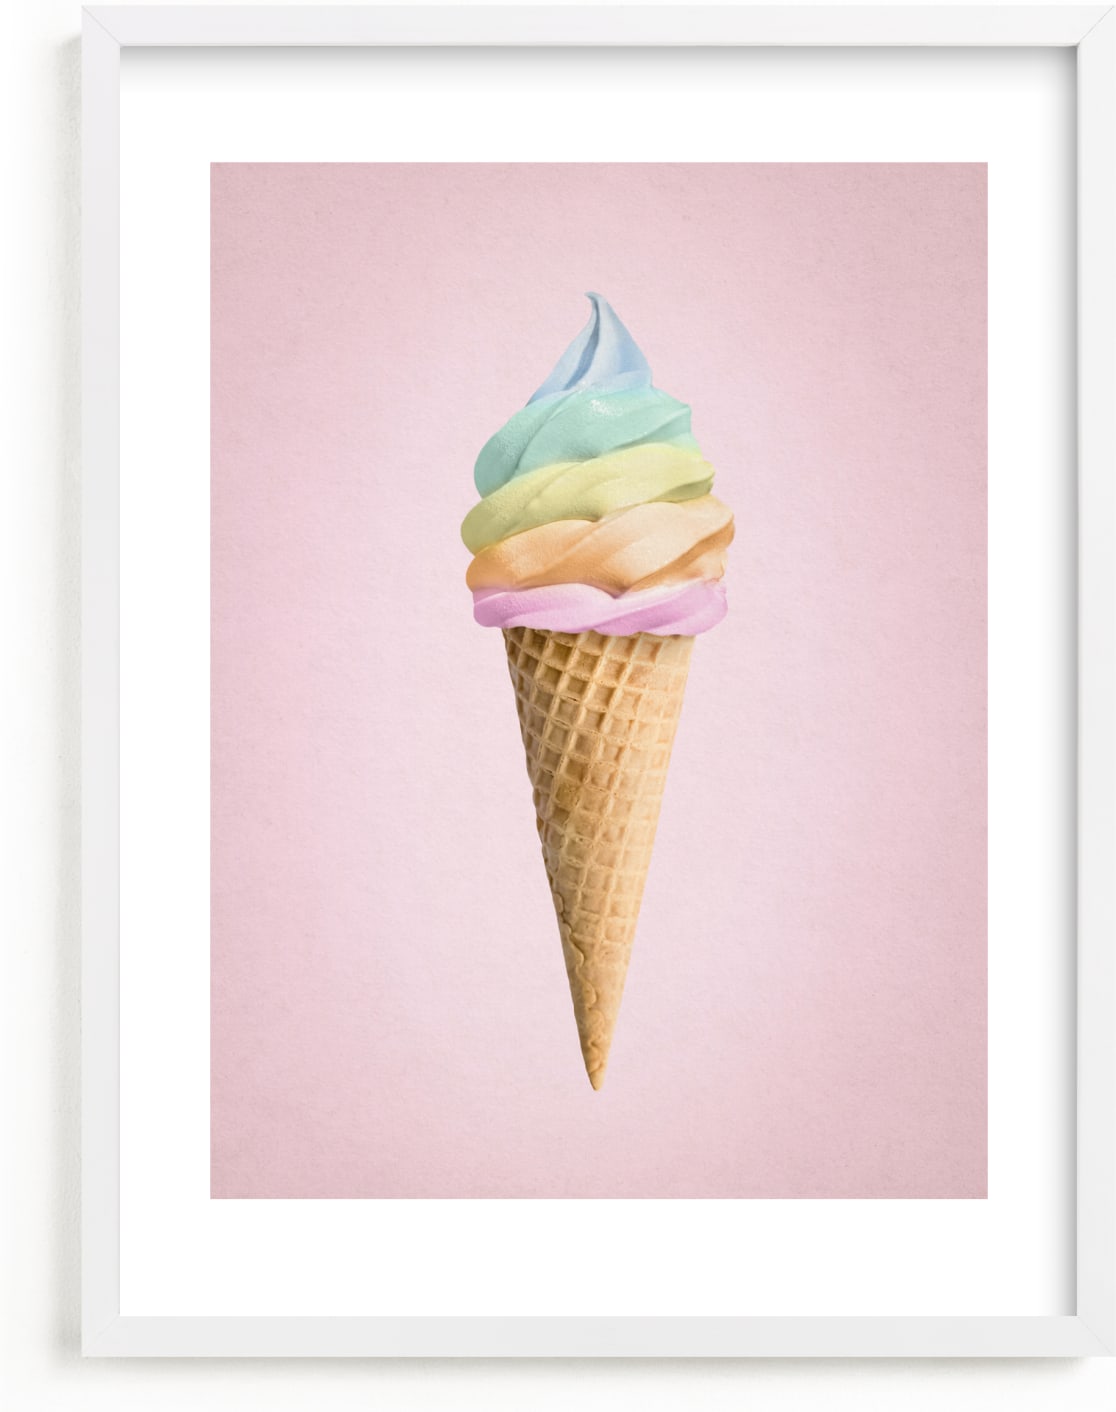 This is a pink art by Paola Benenati called Rainbow Ice Cream.